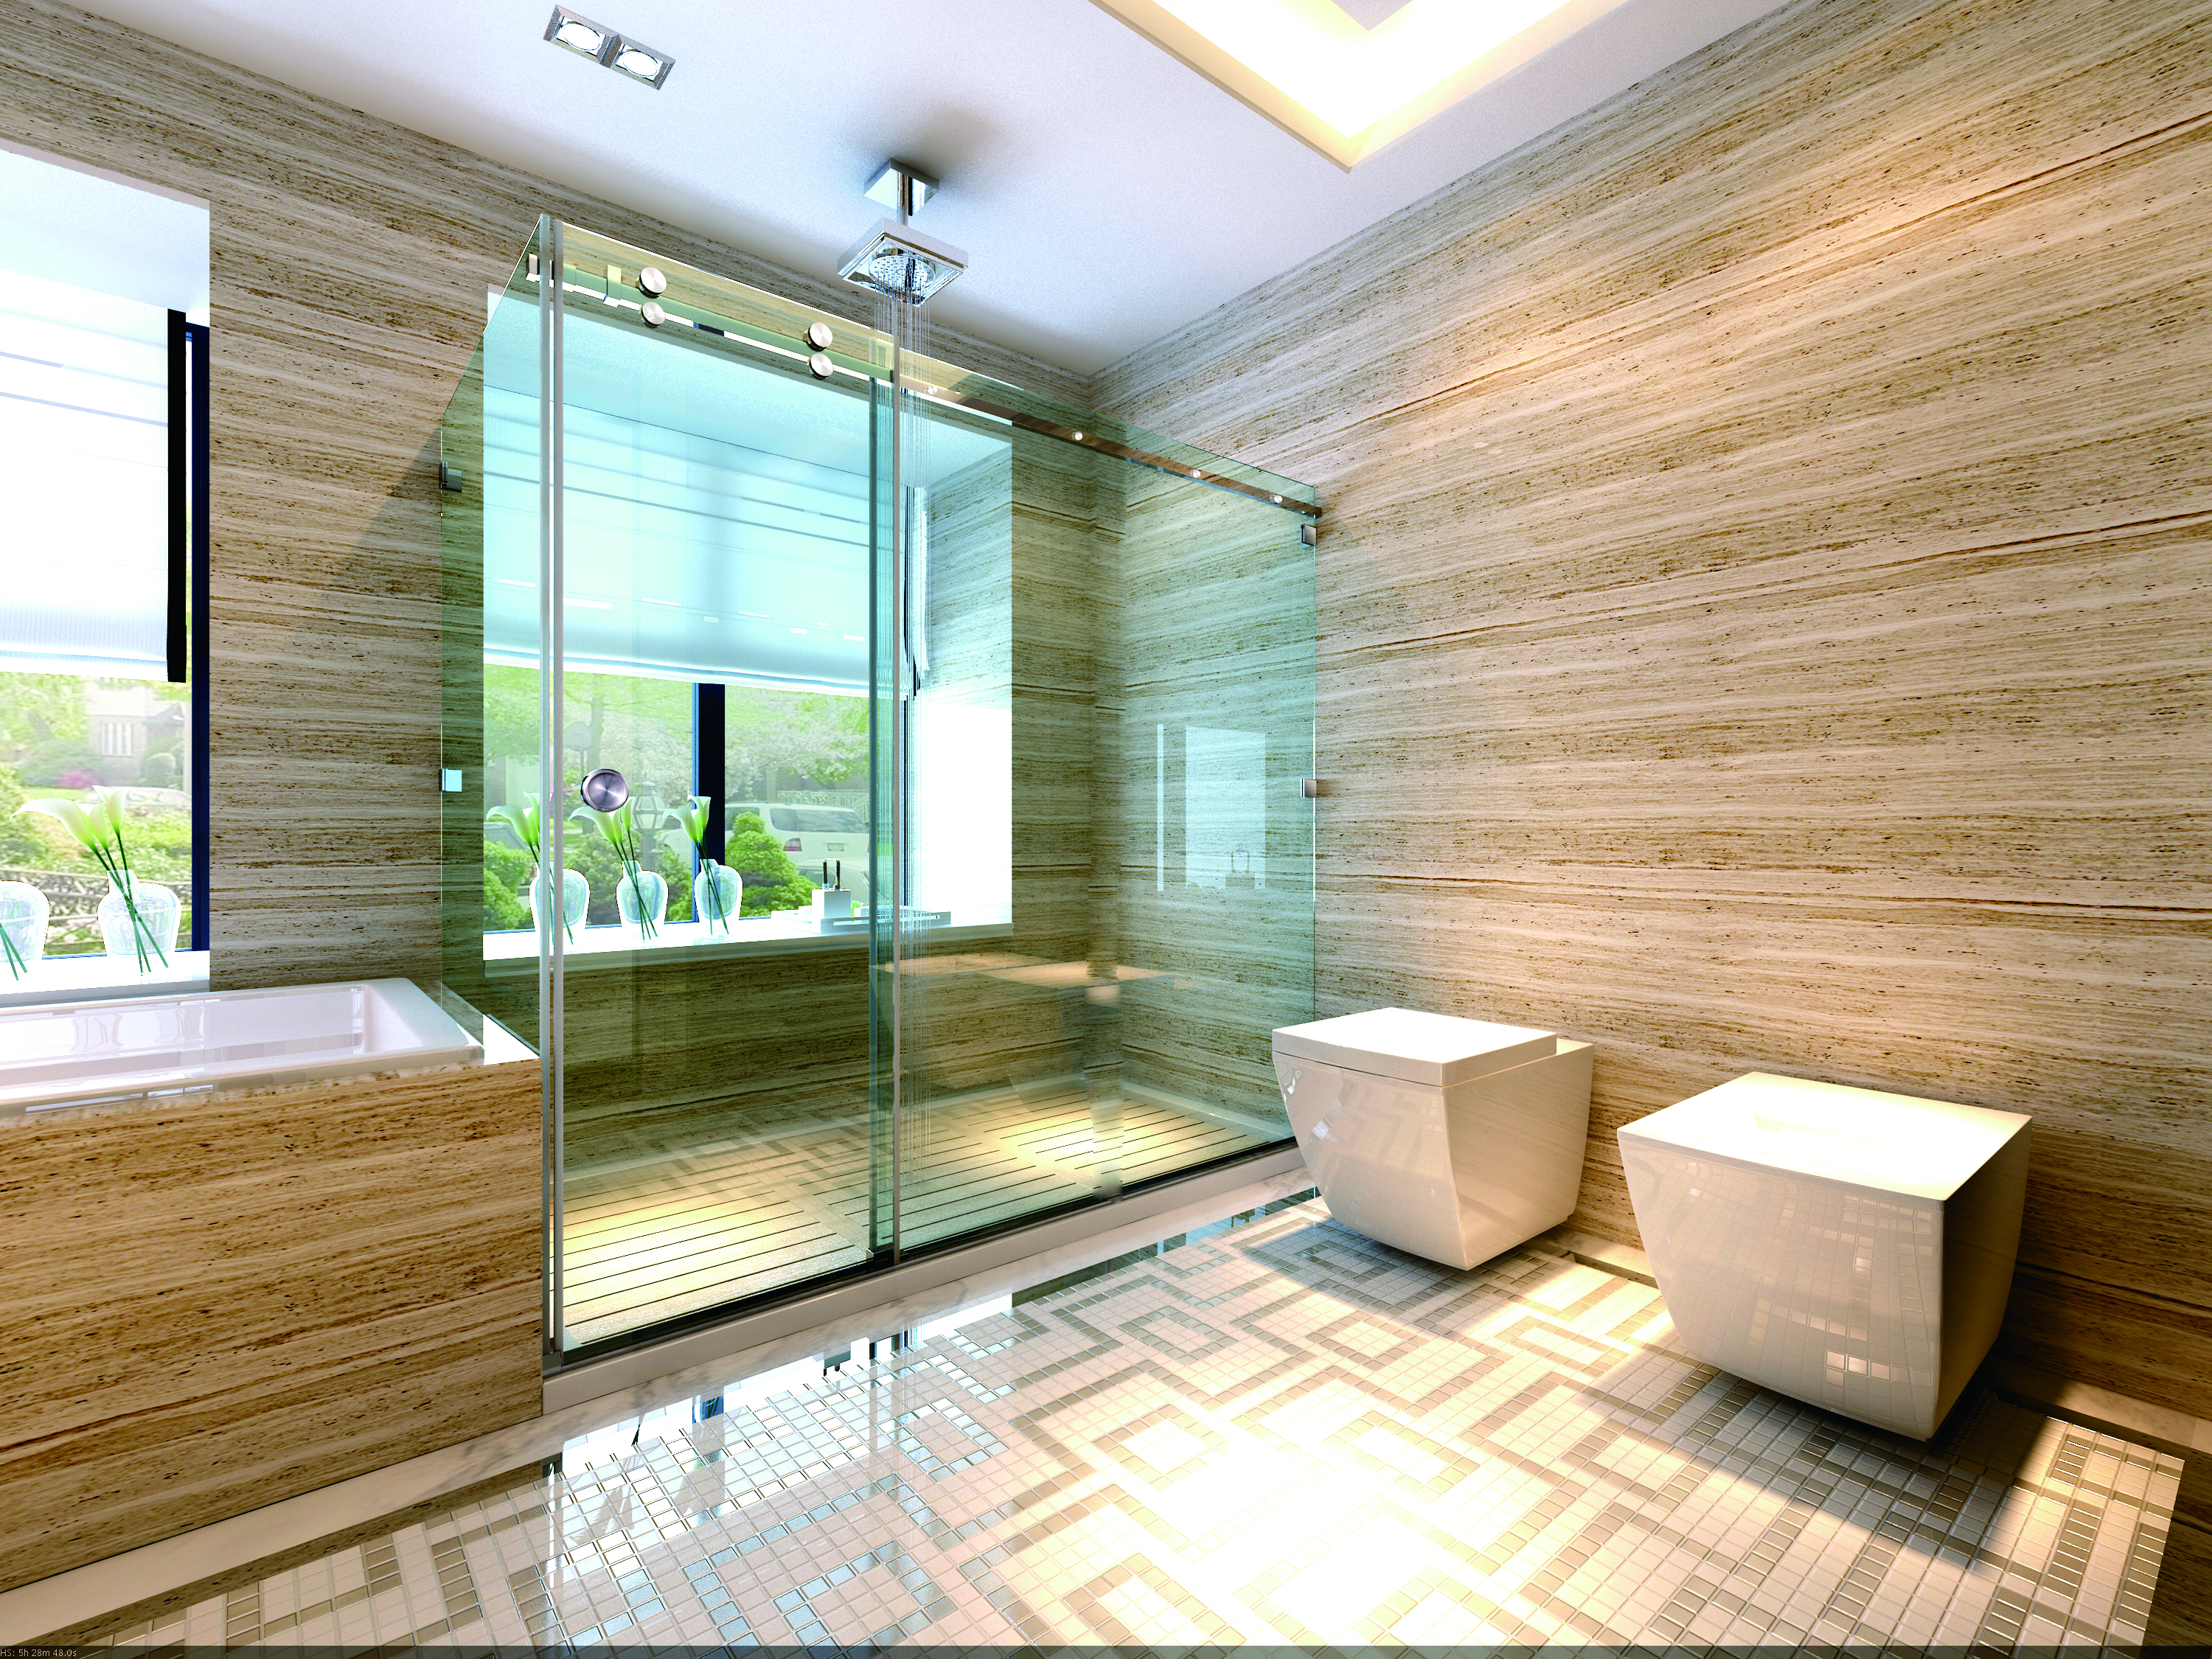 The Perfect Design and Superior Performance of the Shower Sliding Glass Door 7000 System